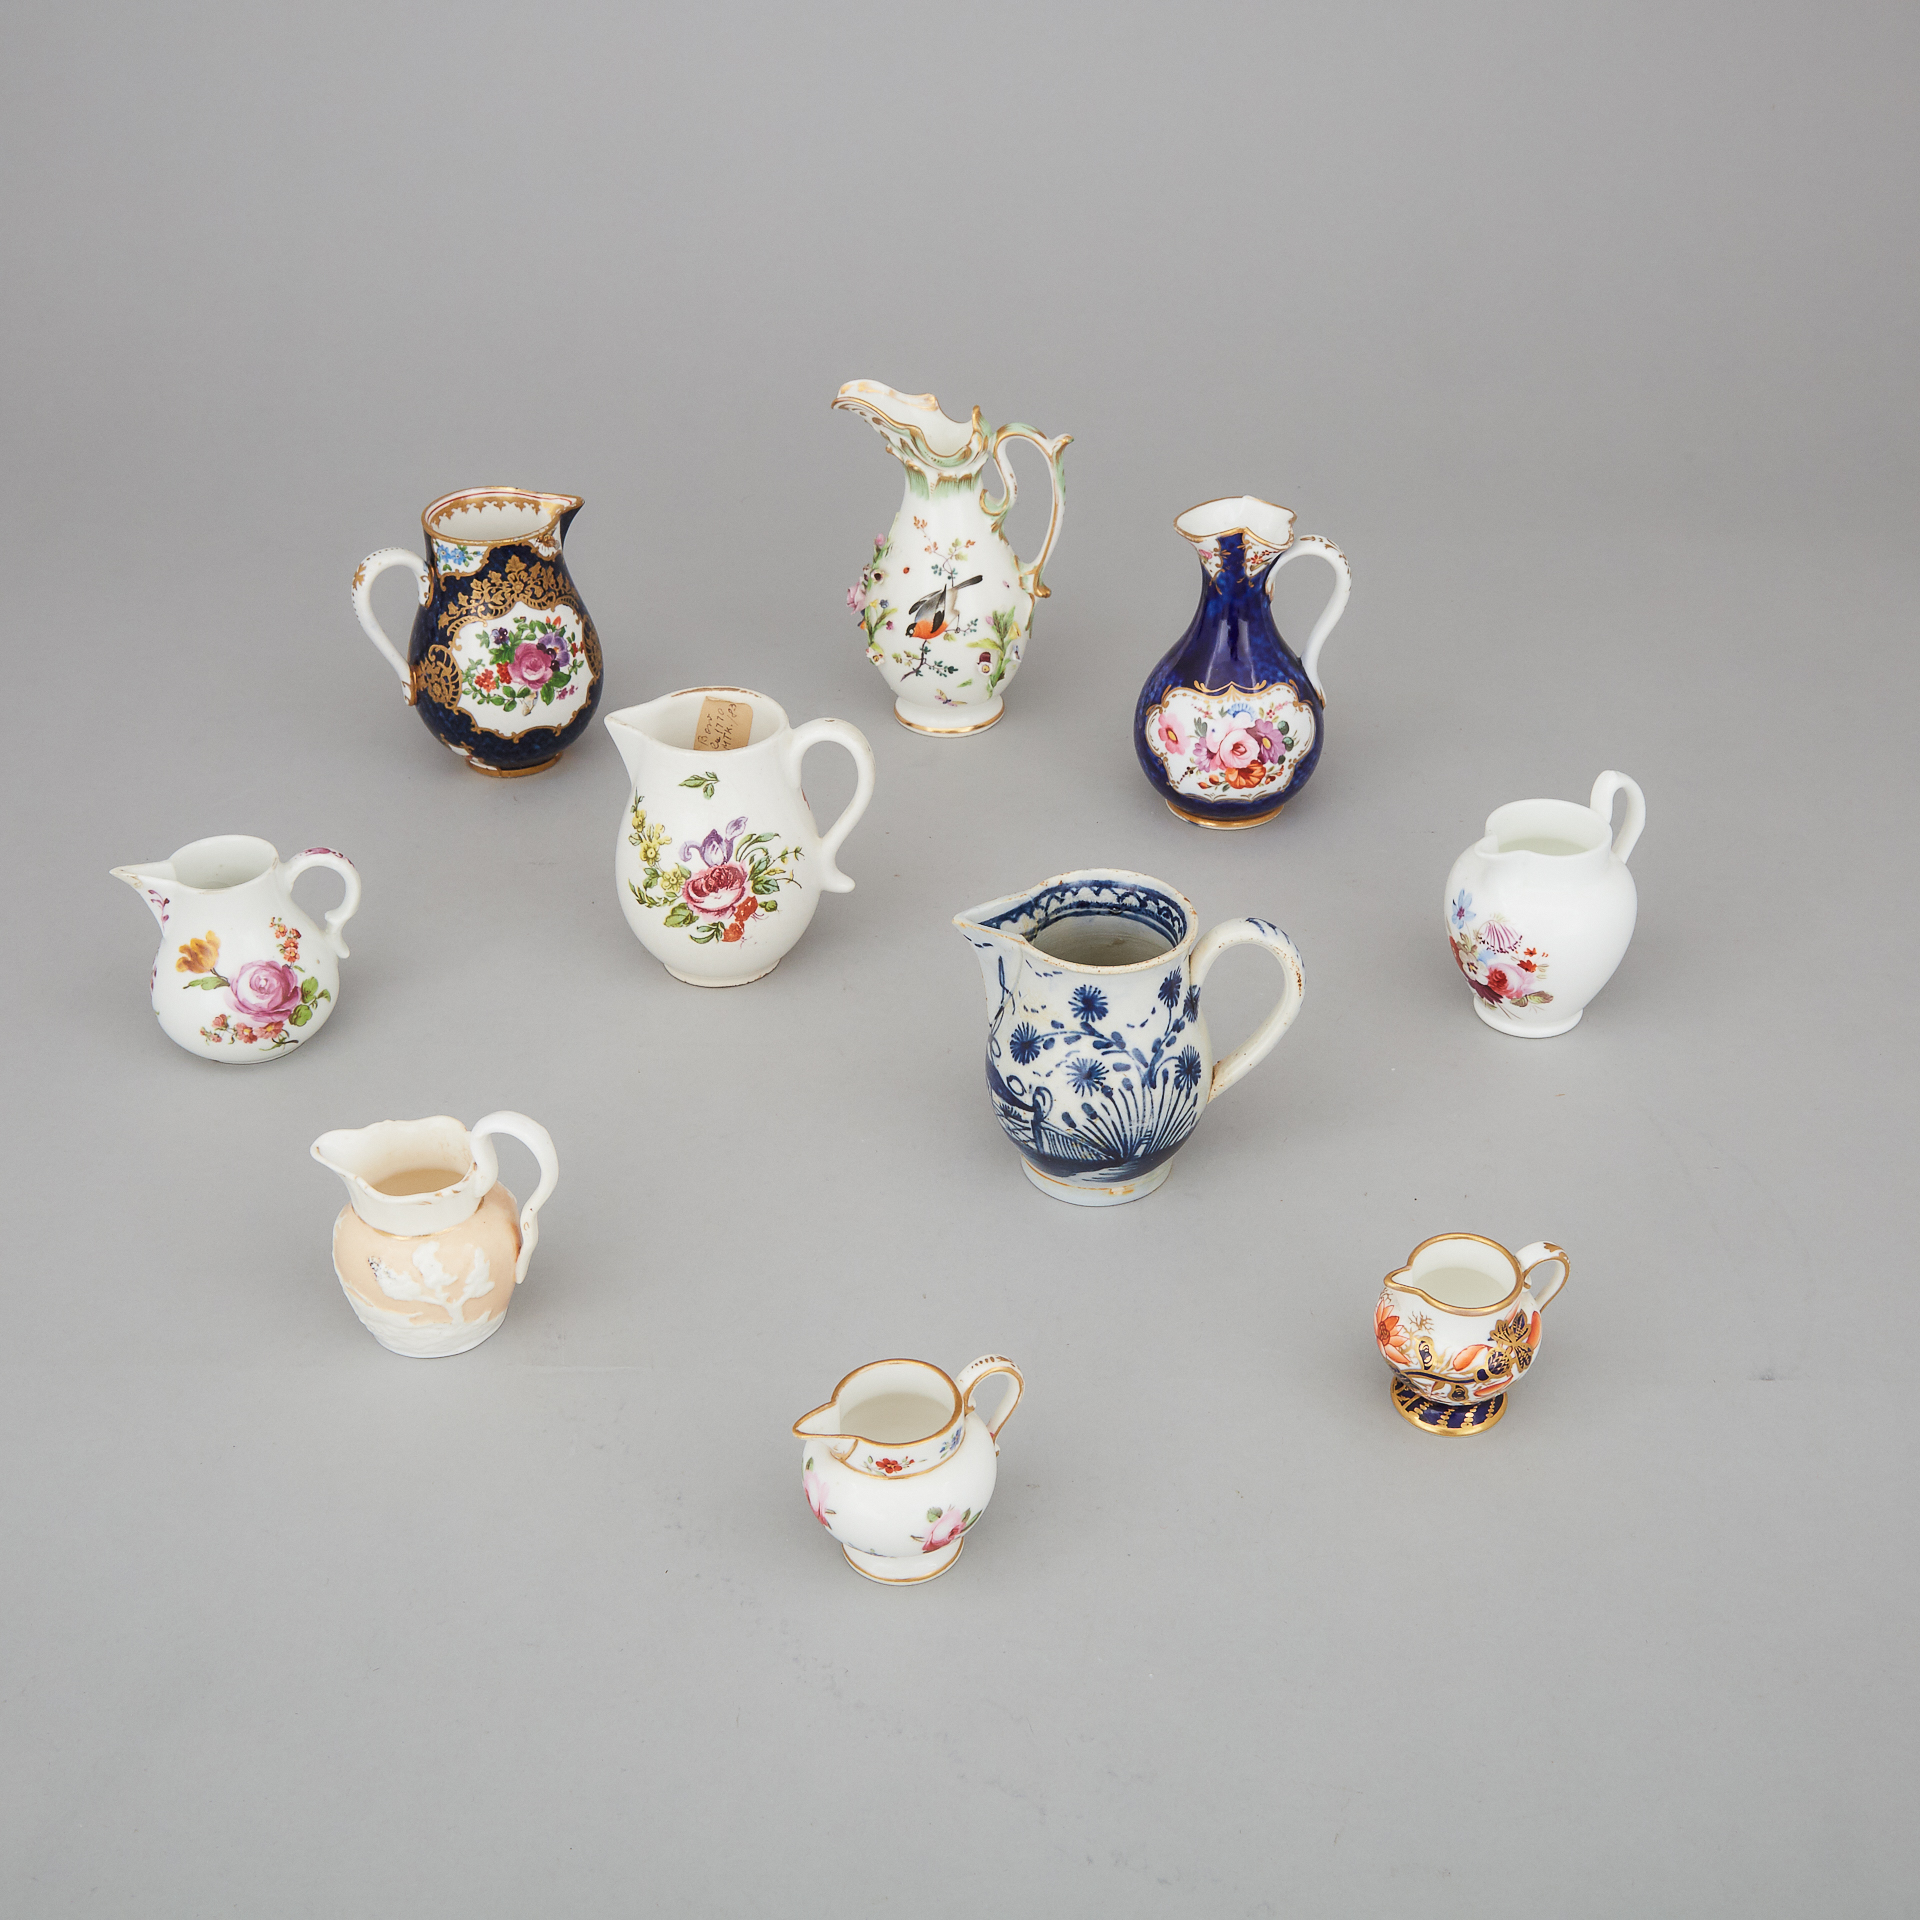 Ten English and Continental Porcelain and Pottery Small Cream Jugs, 19th century